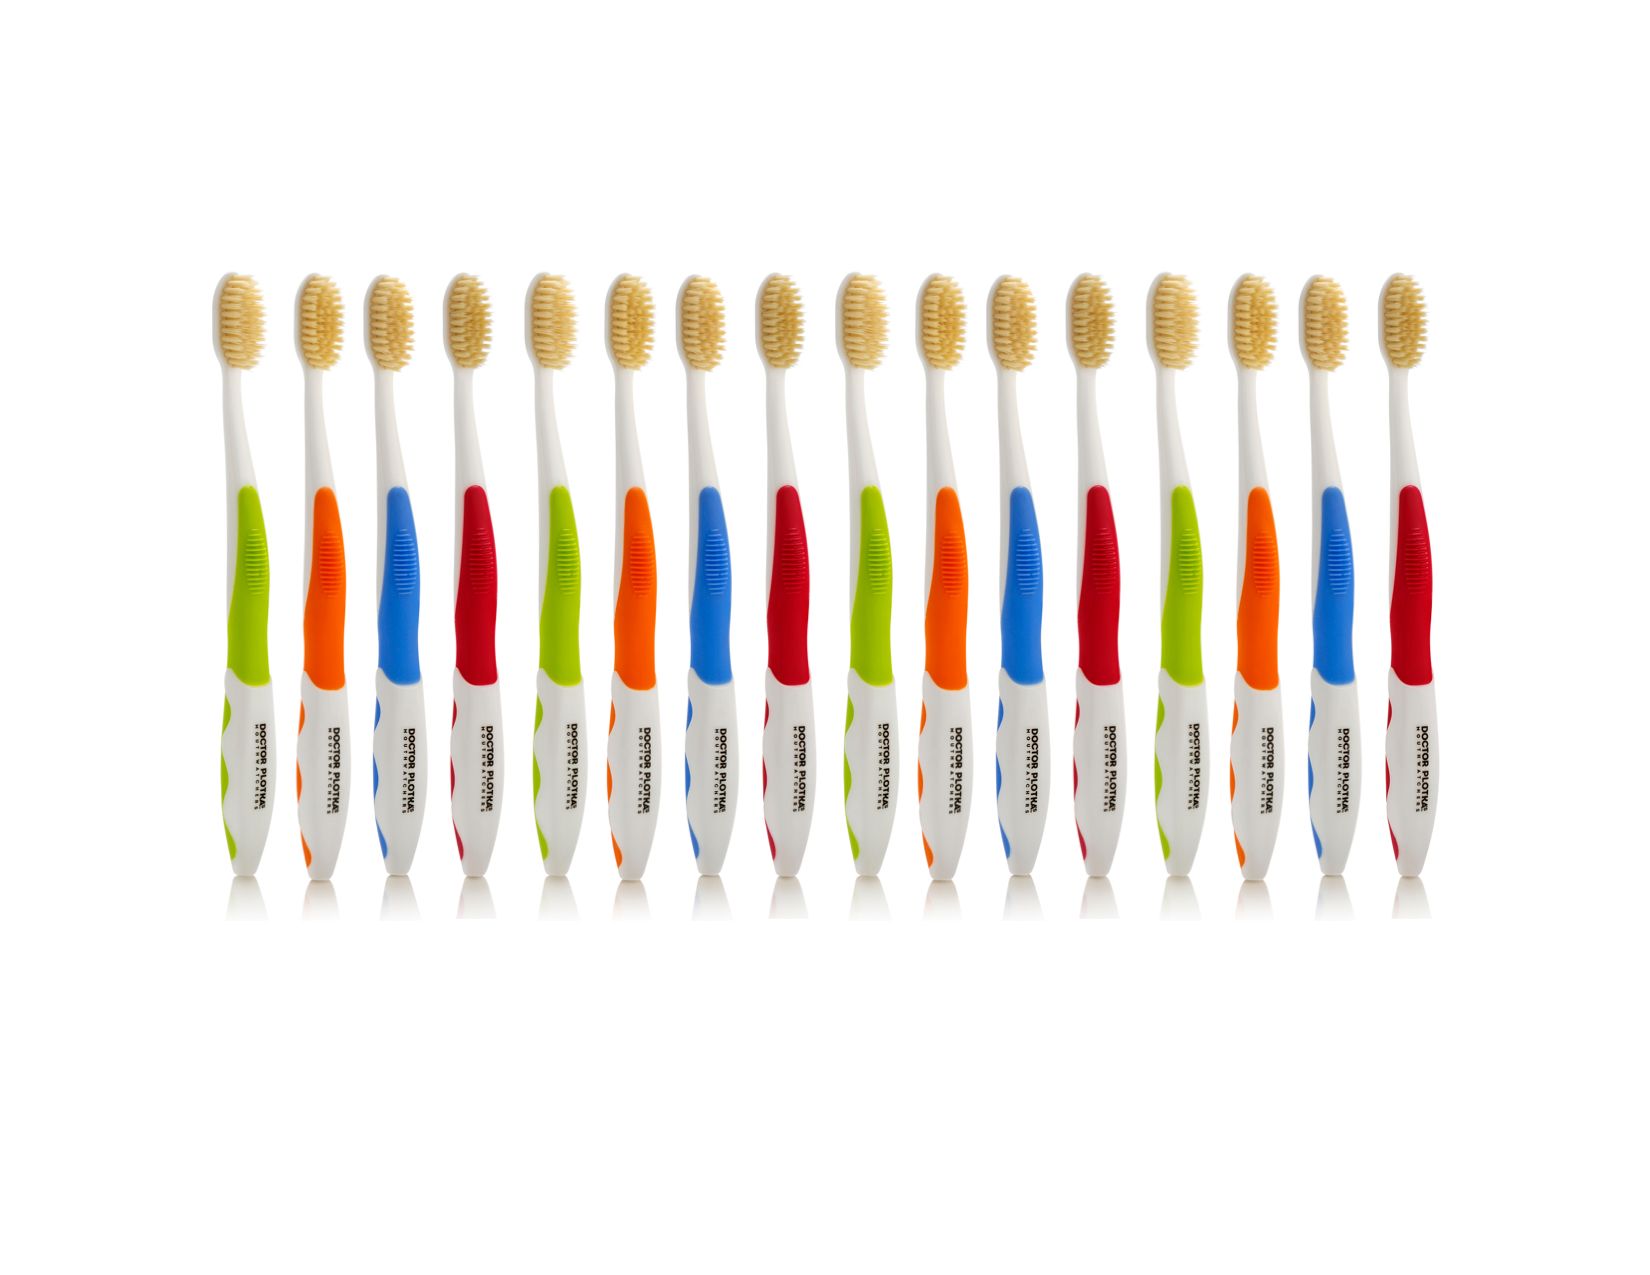 Mouth Watchers Ns-712 Antimicrobial Adult Toothbrush With Flossing Bristles